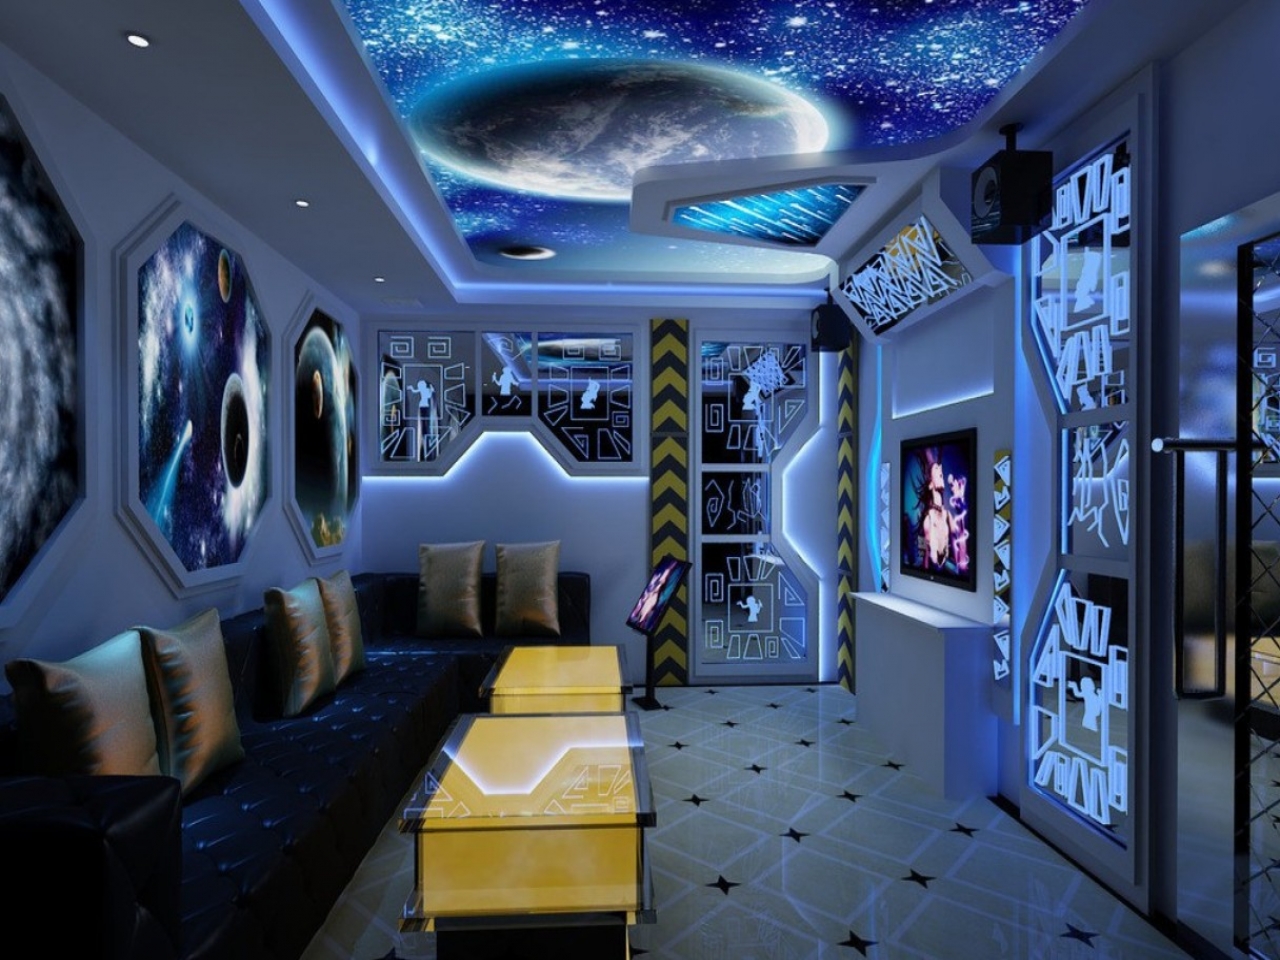 space wallpaper for rooms,interior design,ceiling,room,lighting,building